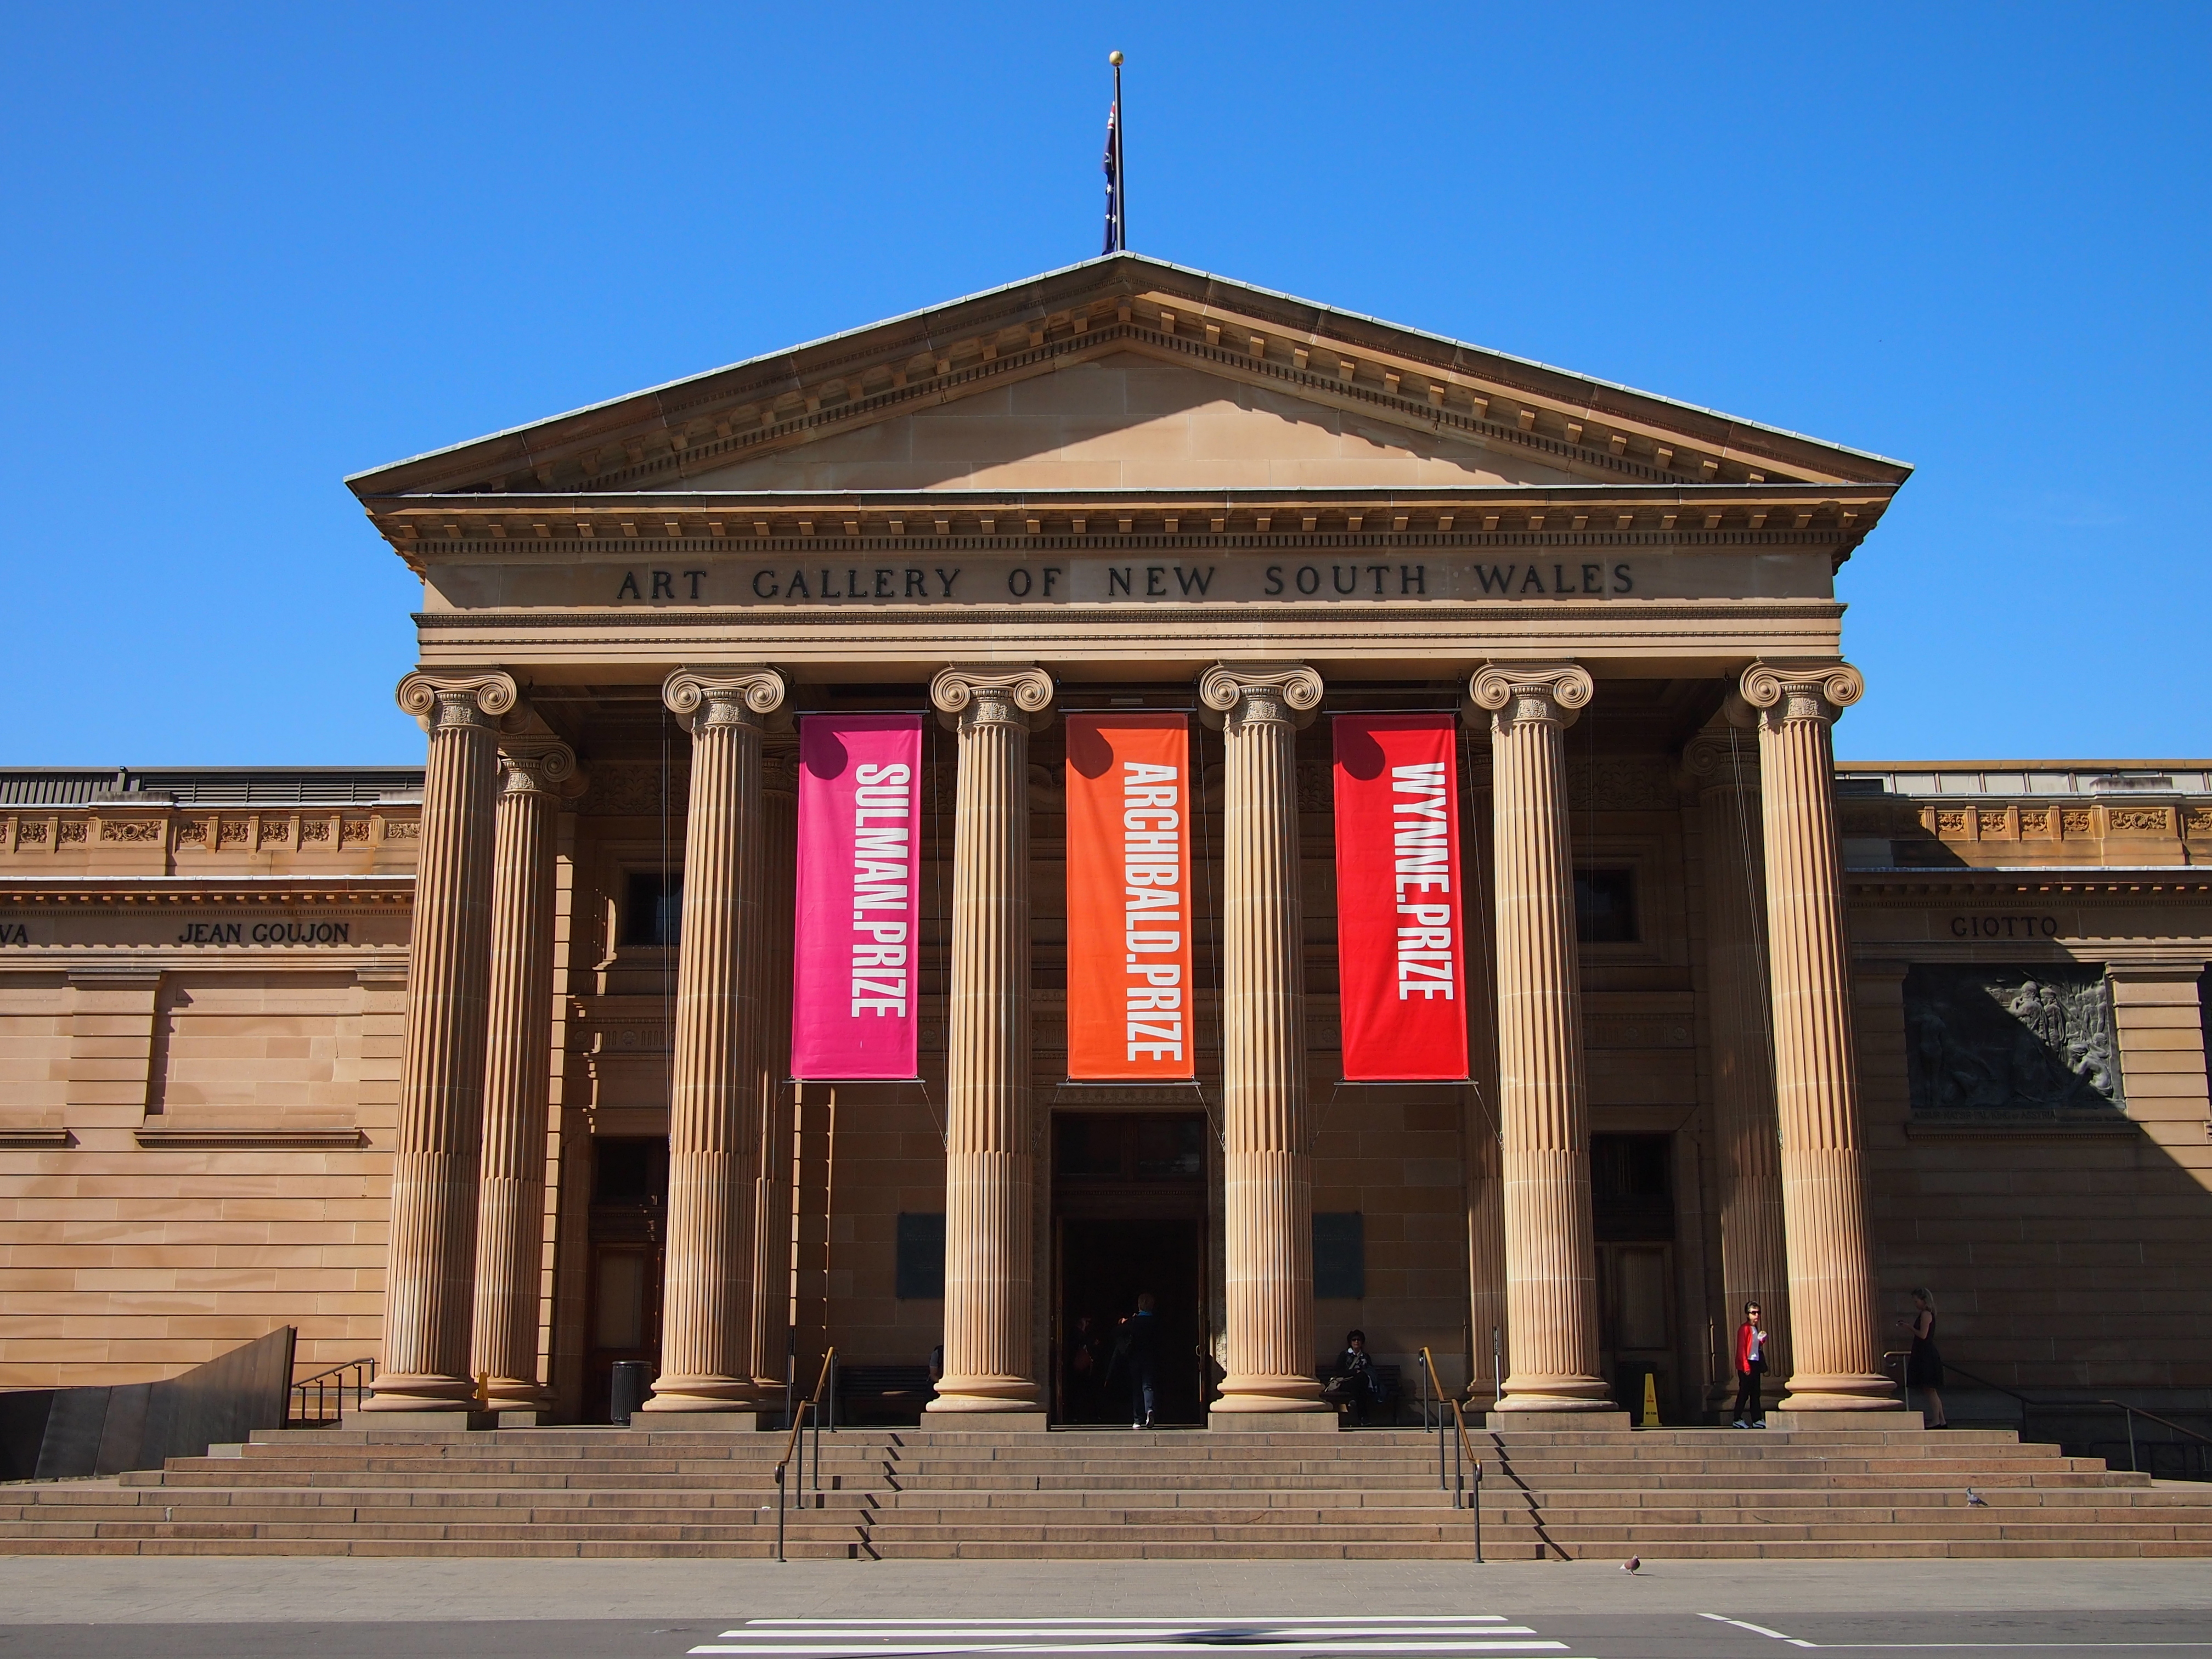 Art Gallery of New South Wales #